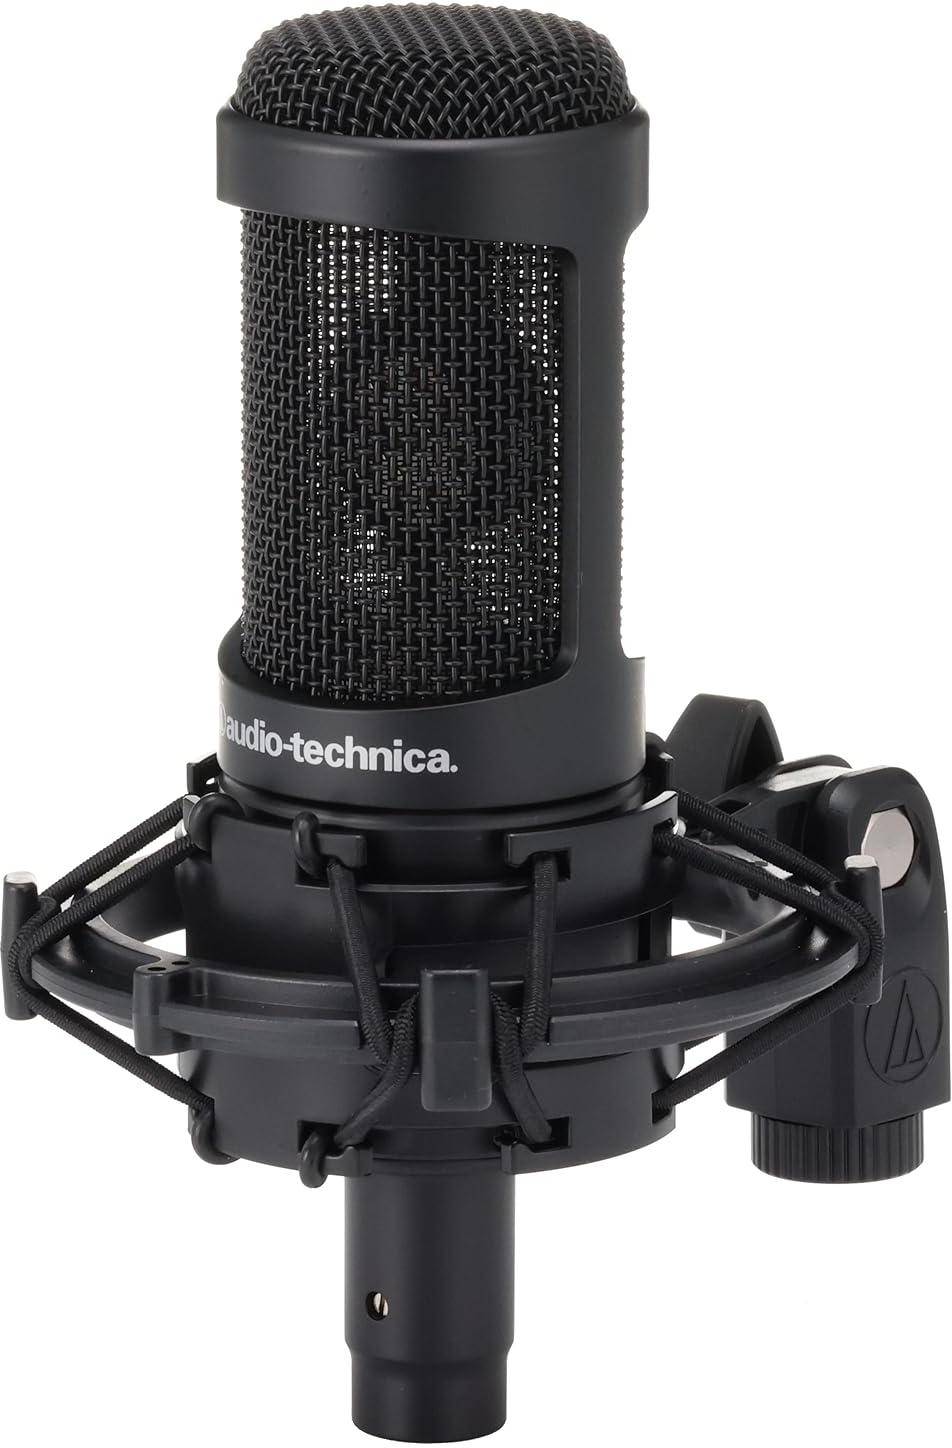 Audio-Technica AT2050 Multi-Pattern Condenser Microphone With Switchable 80 Hz high-pass filter and 10 dB pad zoom image